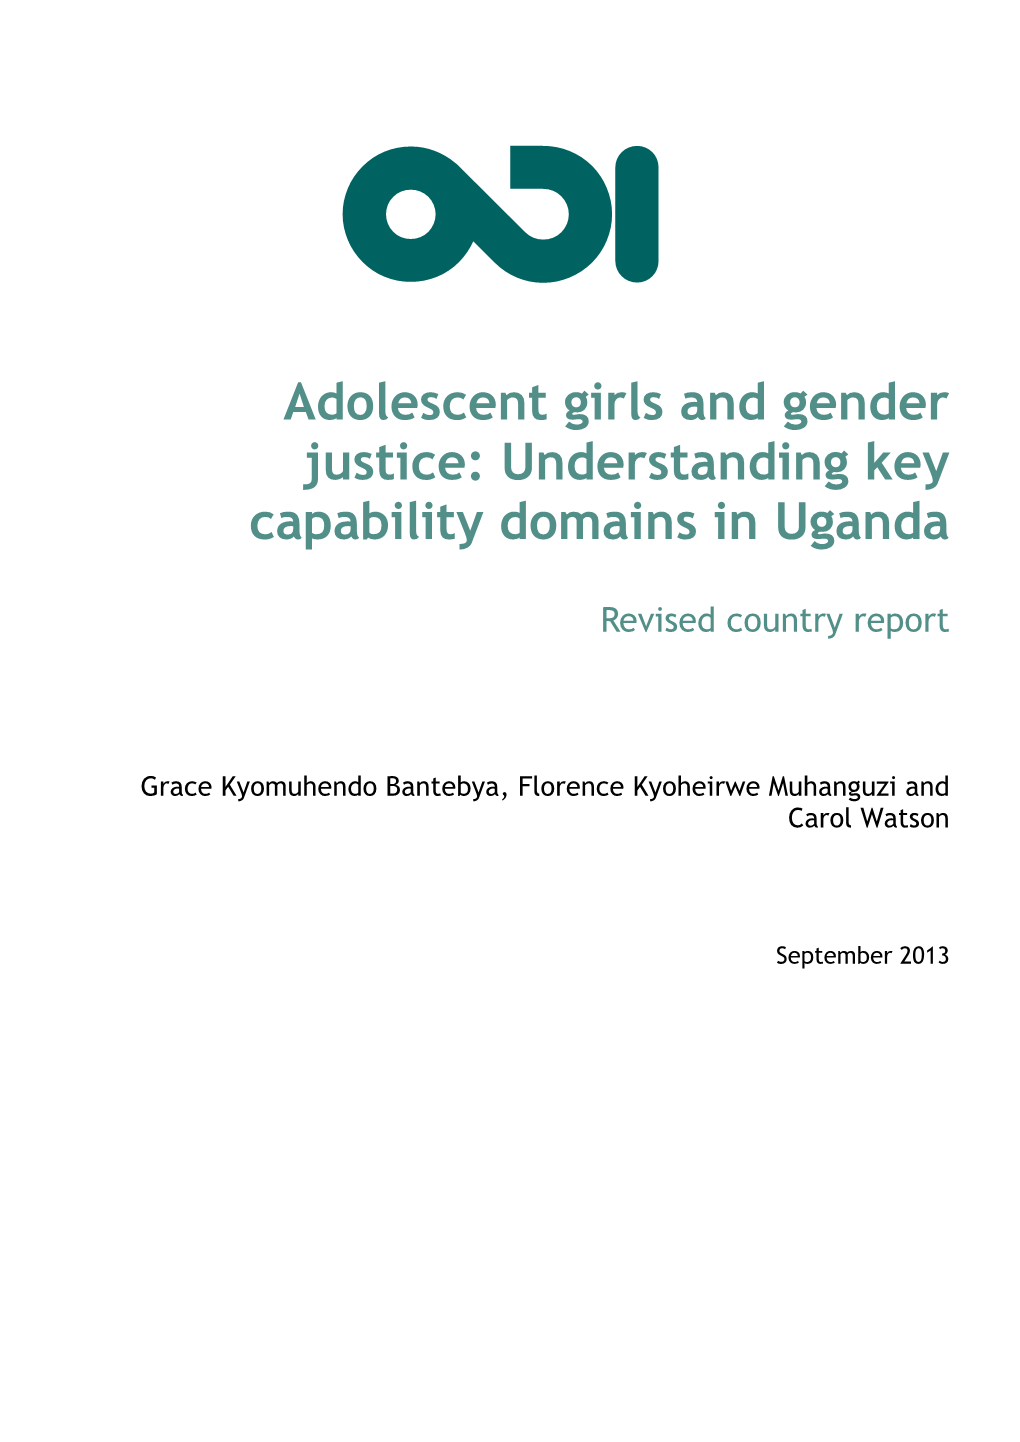 Adolescent Girls and Gender Justice: Understanding Key Capability Domains in Uganda